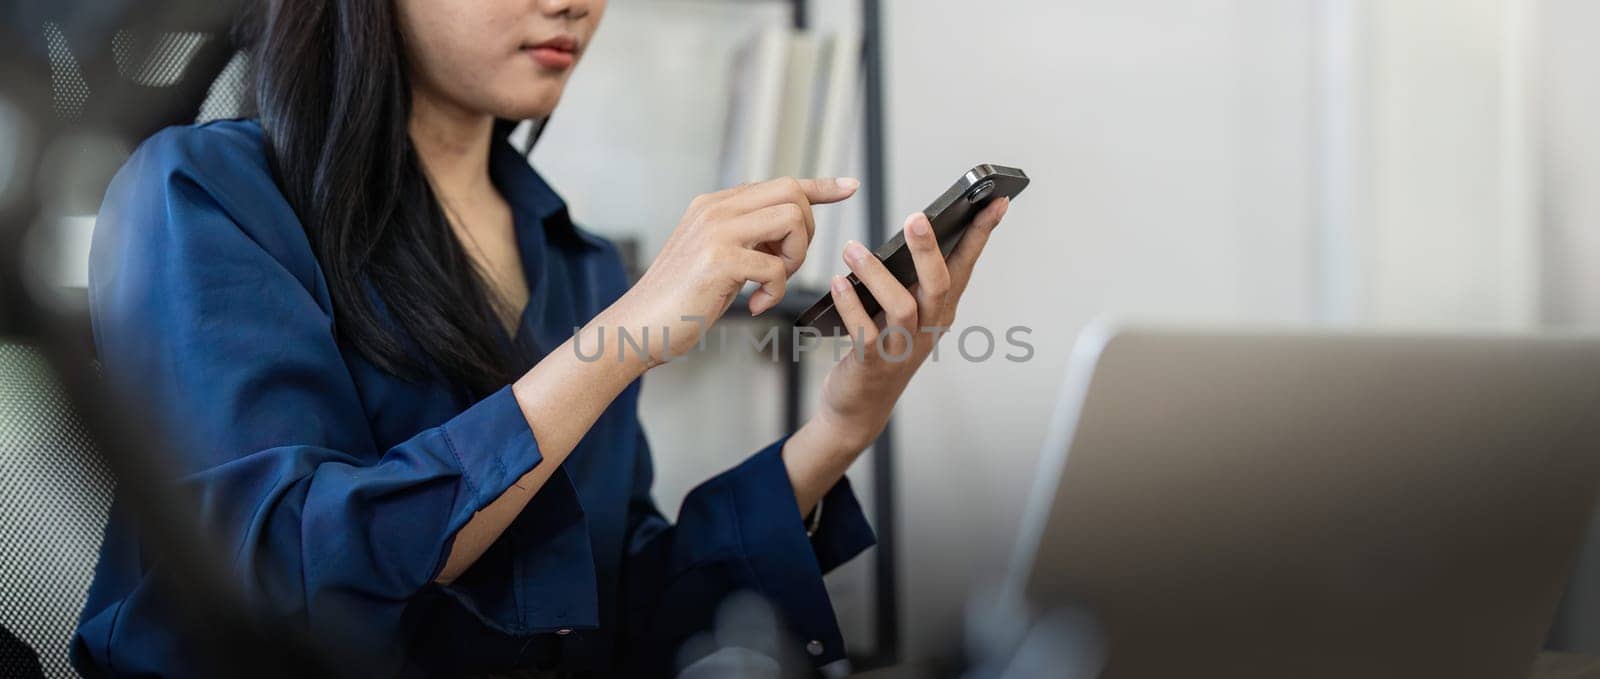 Young business woman on the phone at office. Business woman texting on the phone and working on laptop. Pretty young business woman sitting on workplace by nateemee